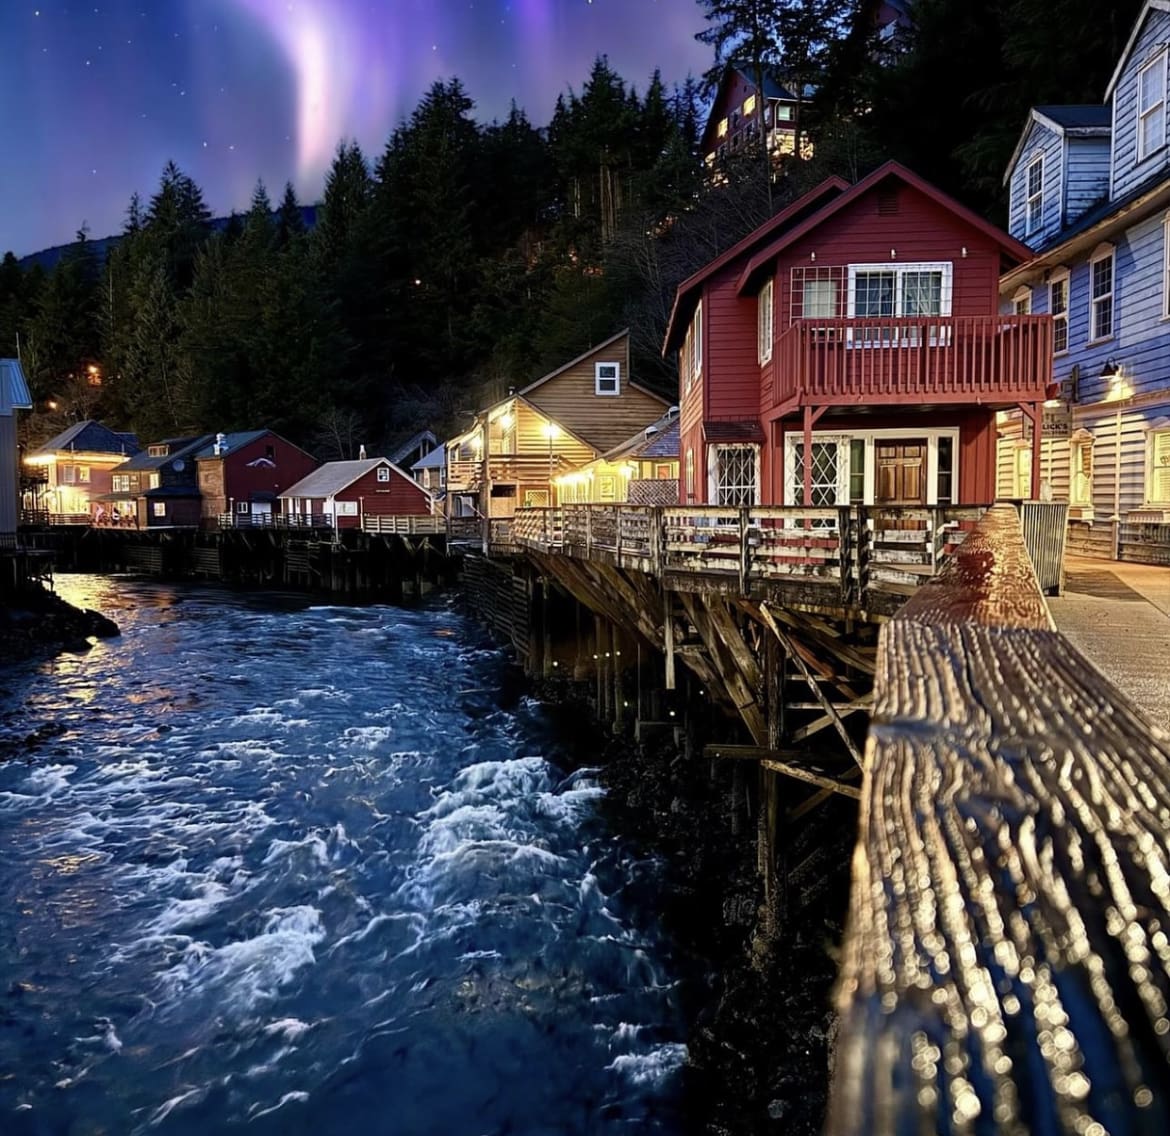 Ketchikan and the Northern Lights